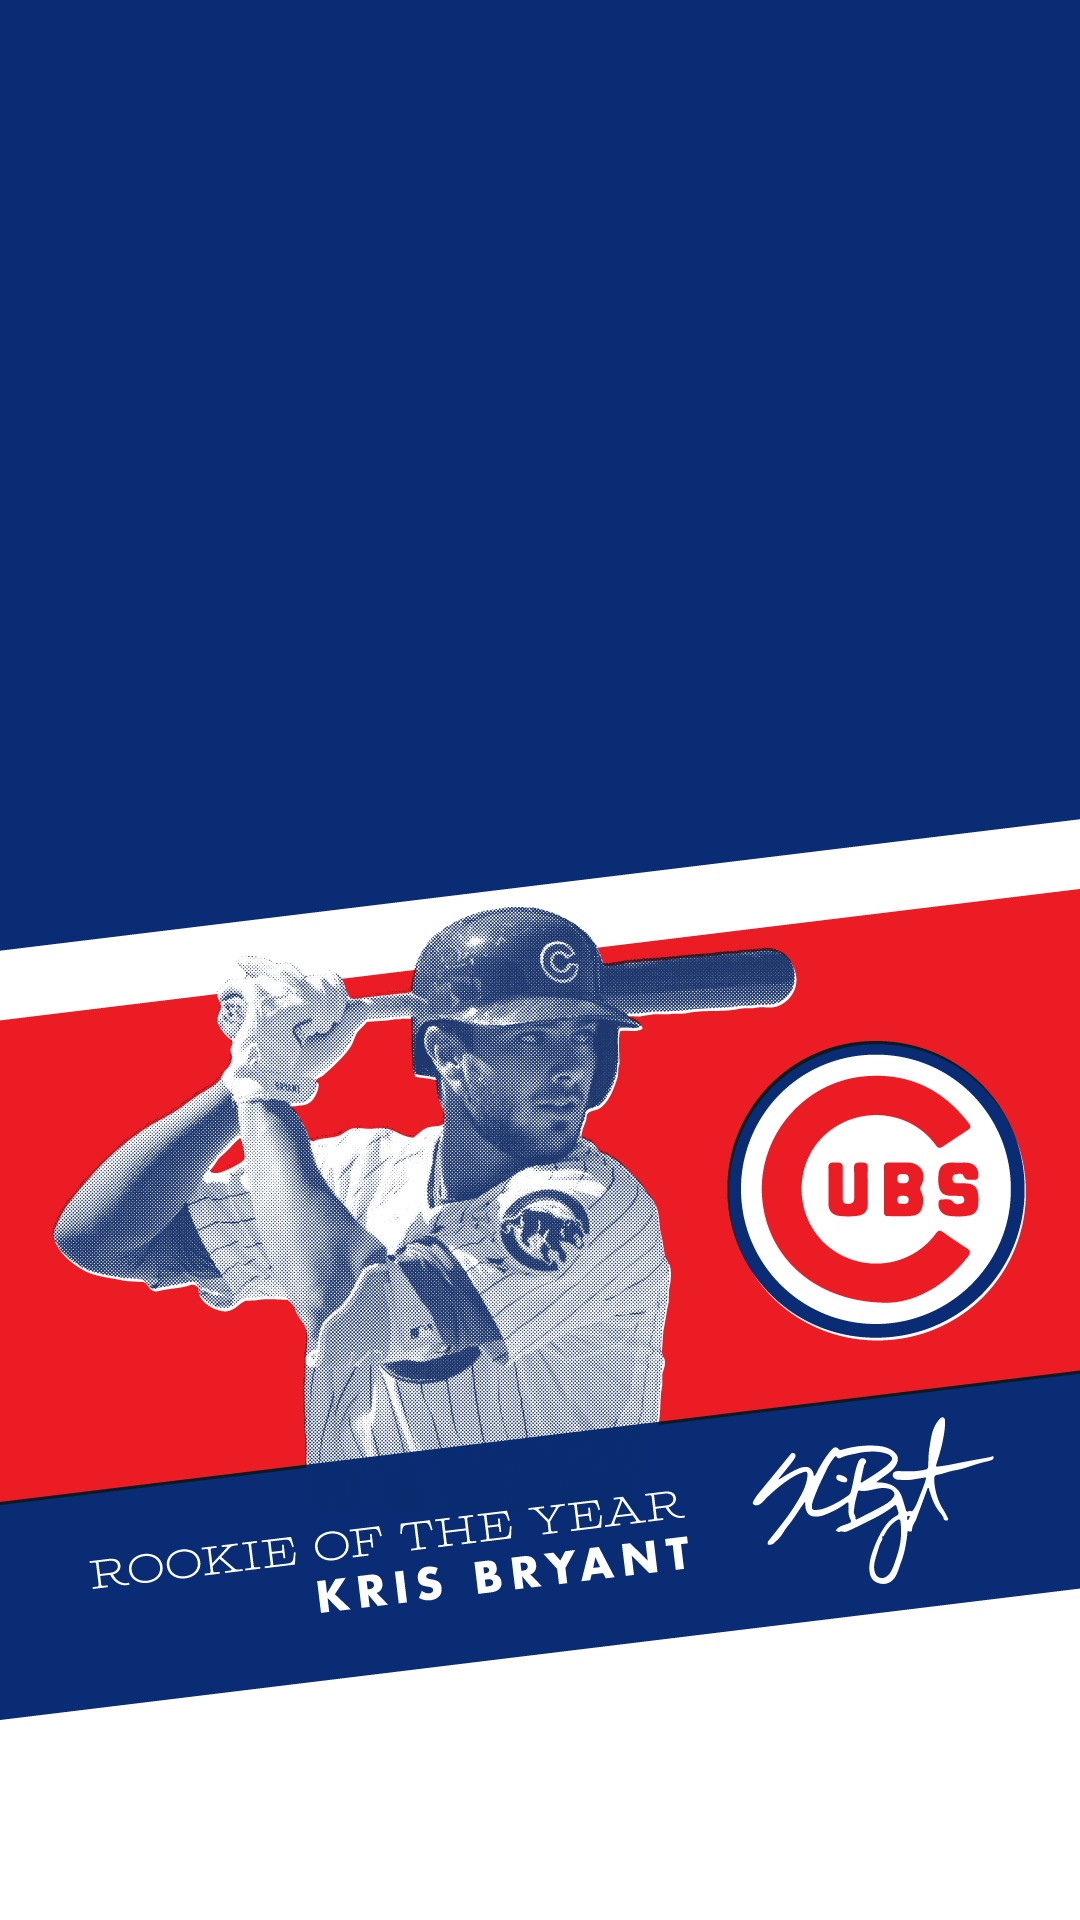 1080x1920 Kris Bryant Rookie of the Year, ...